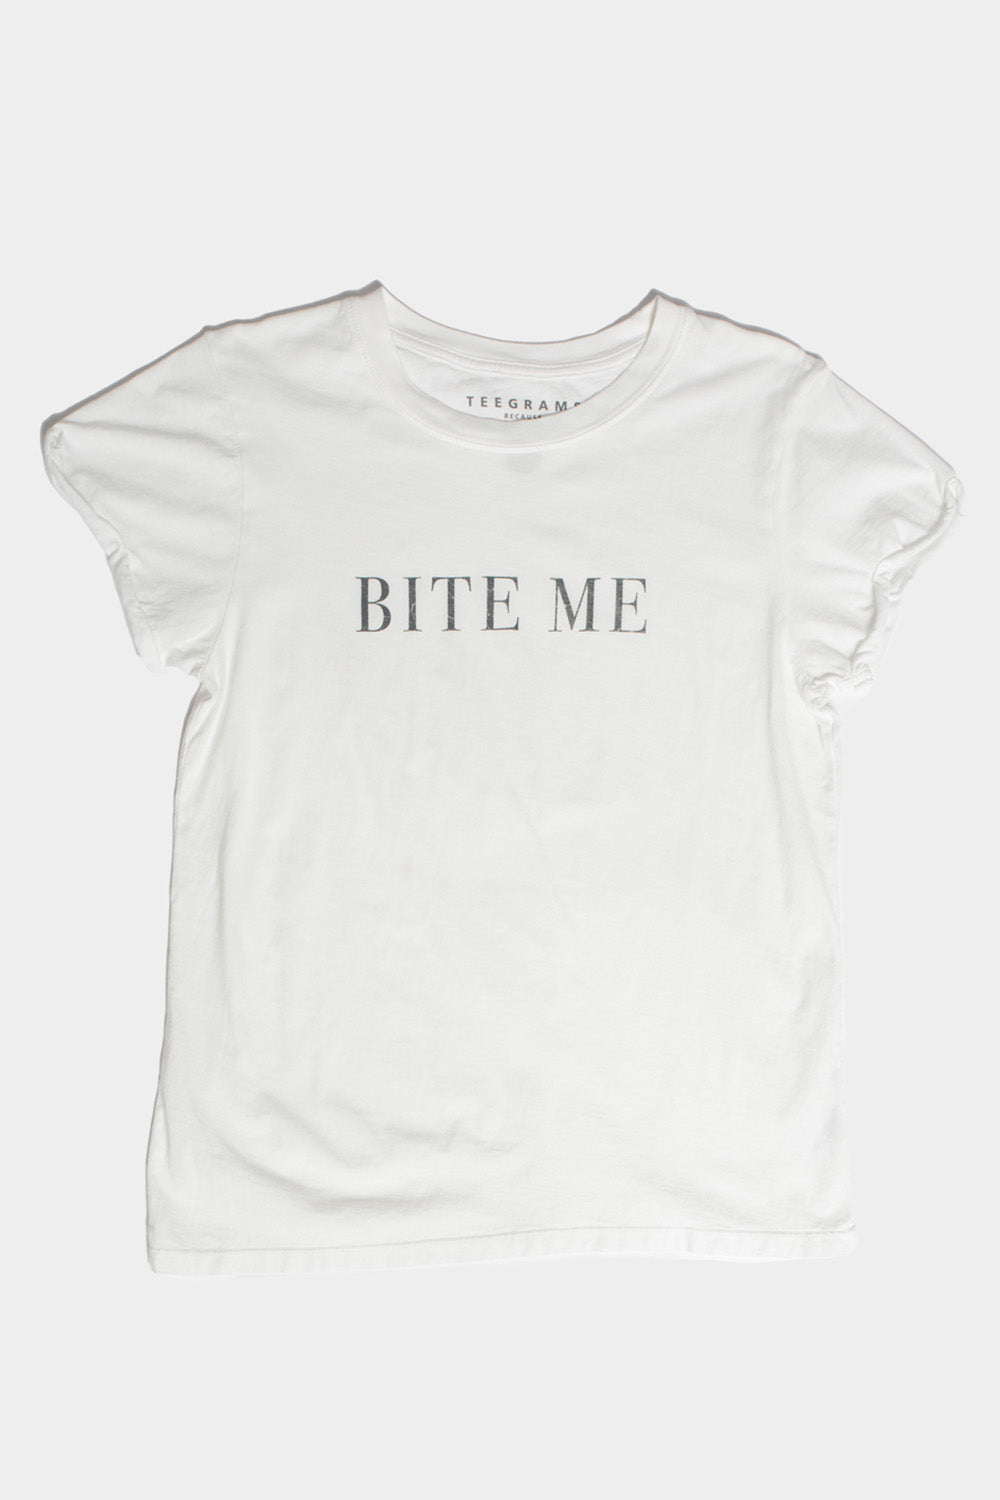 Bite Me White Fitted Tee